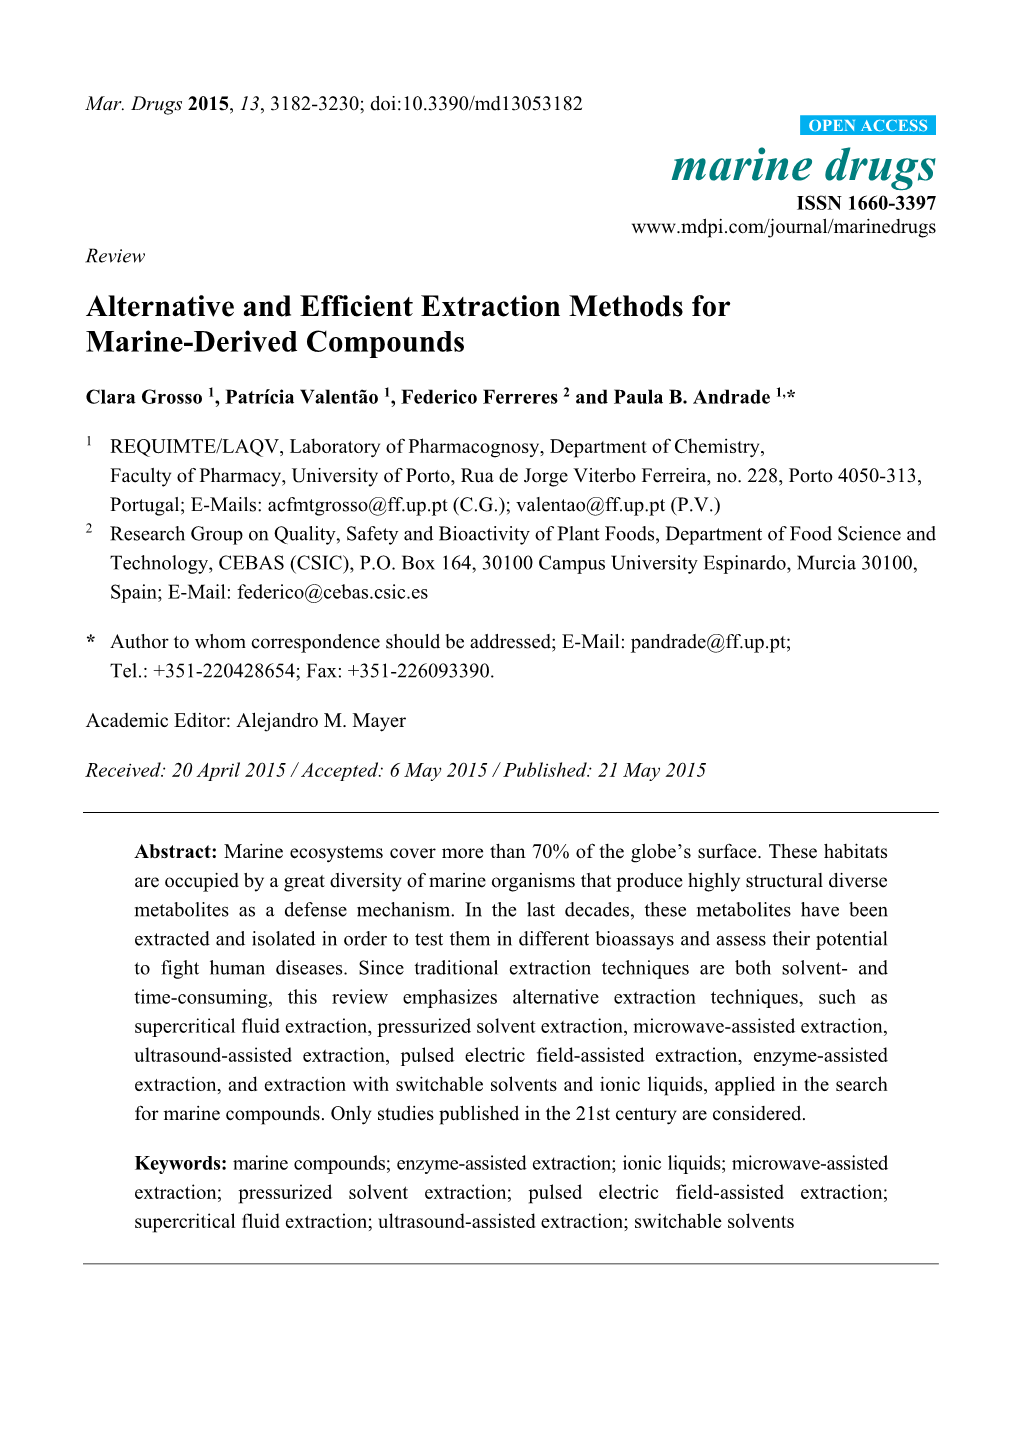 Alternative and Efficient Extraction Methods for Marine-Derived Compounds